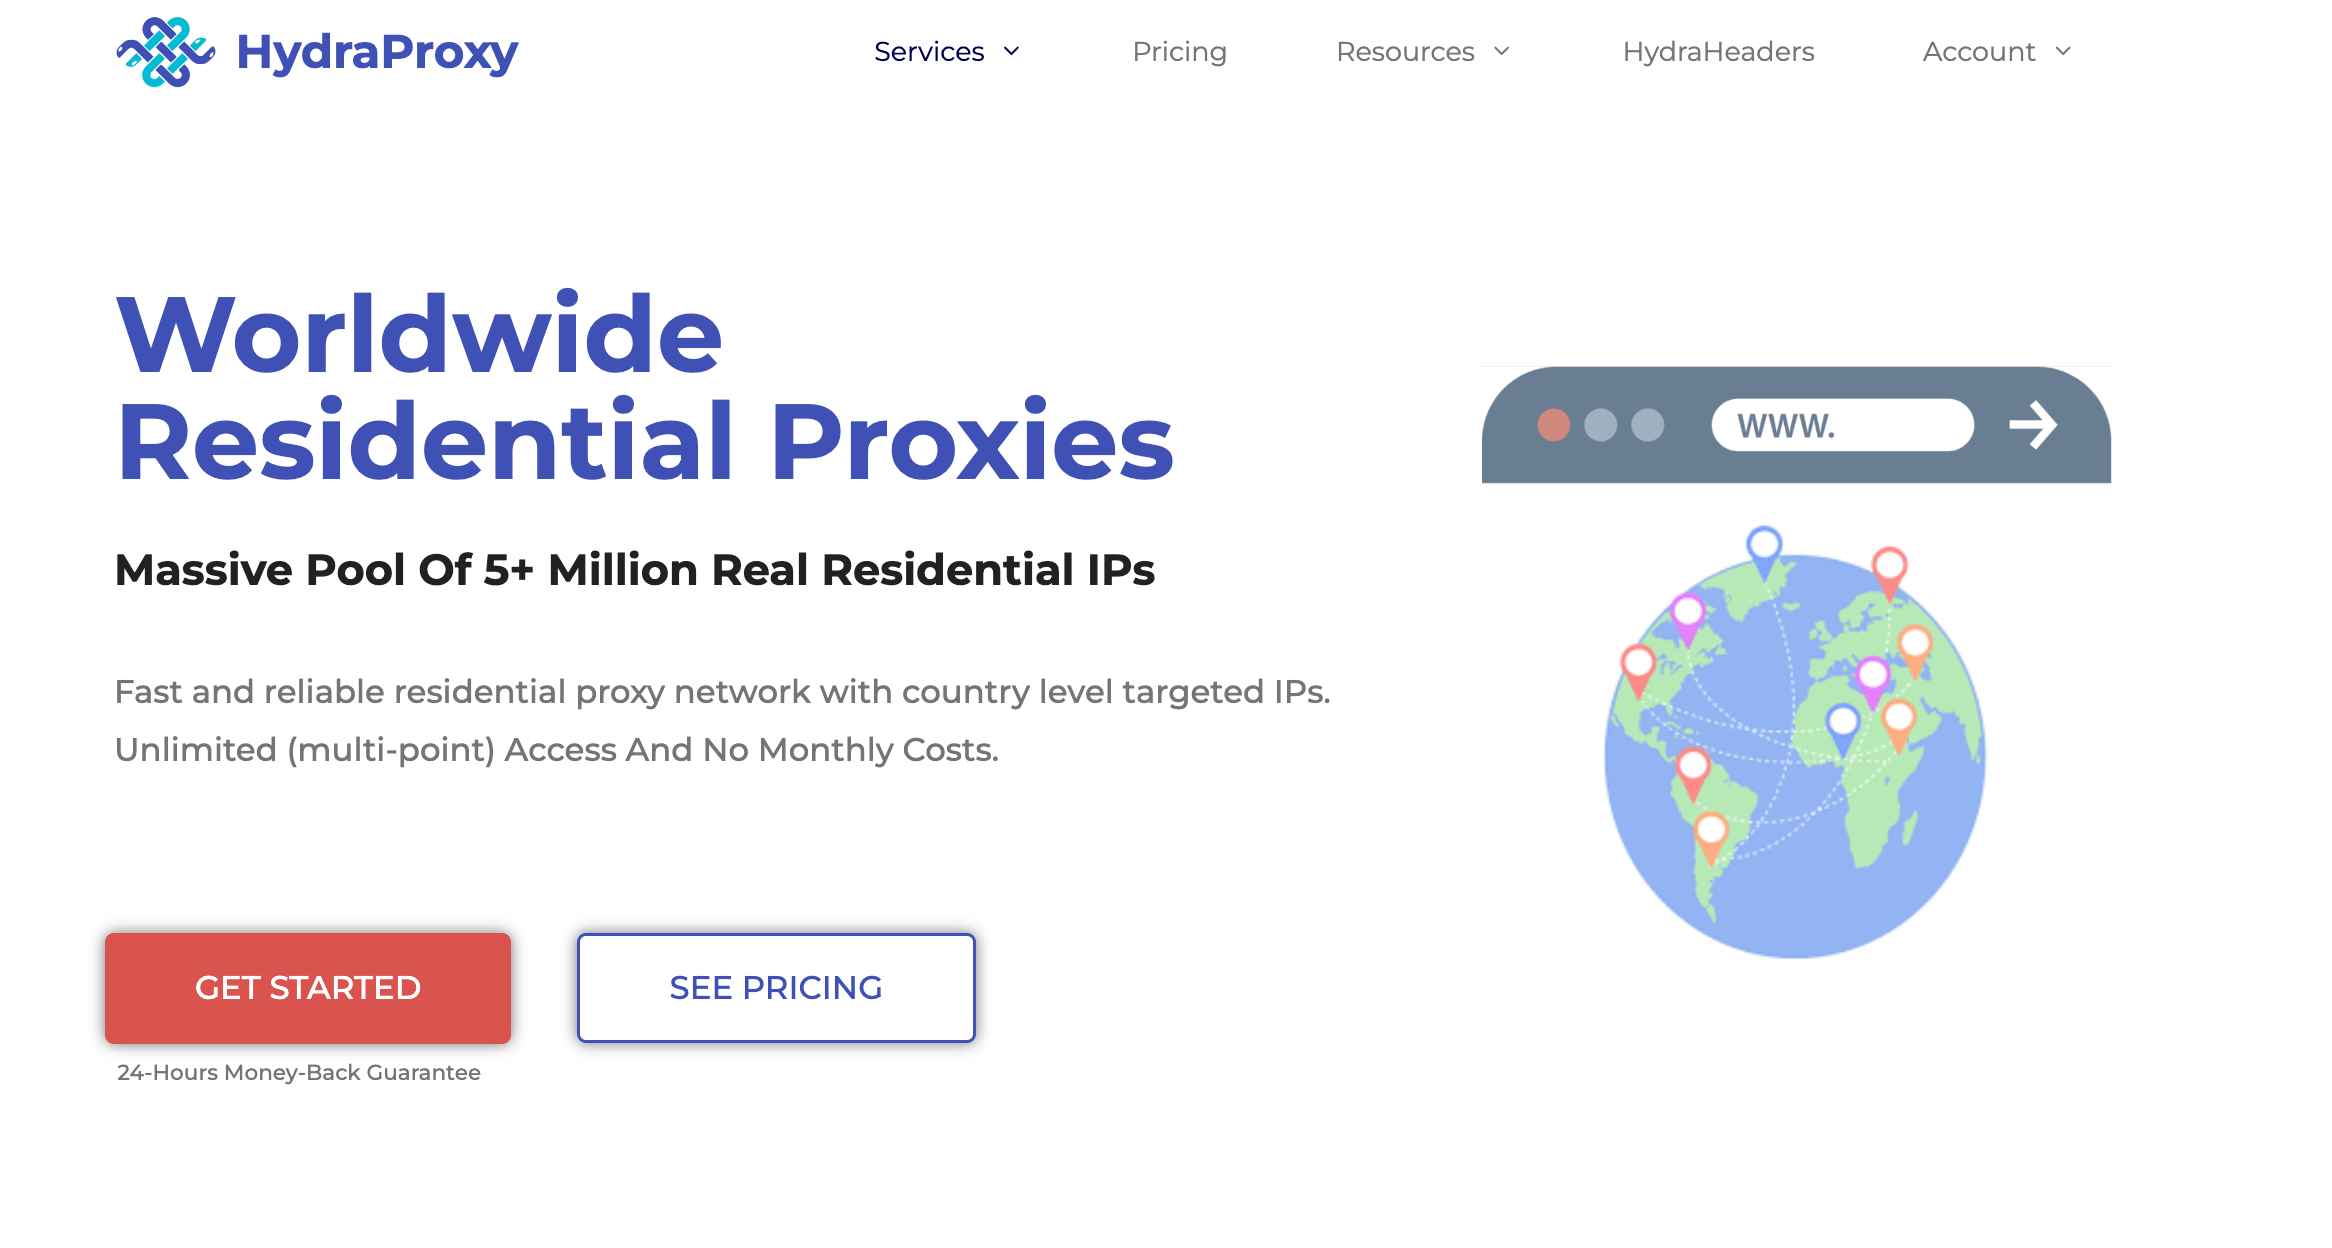 Residential Proxies offered by HydraProxy